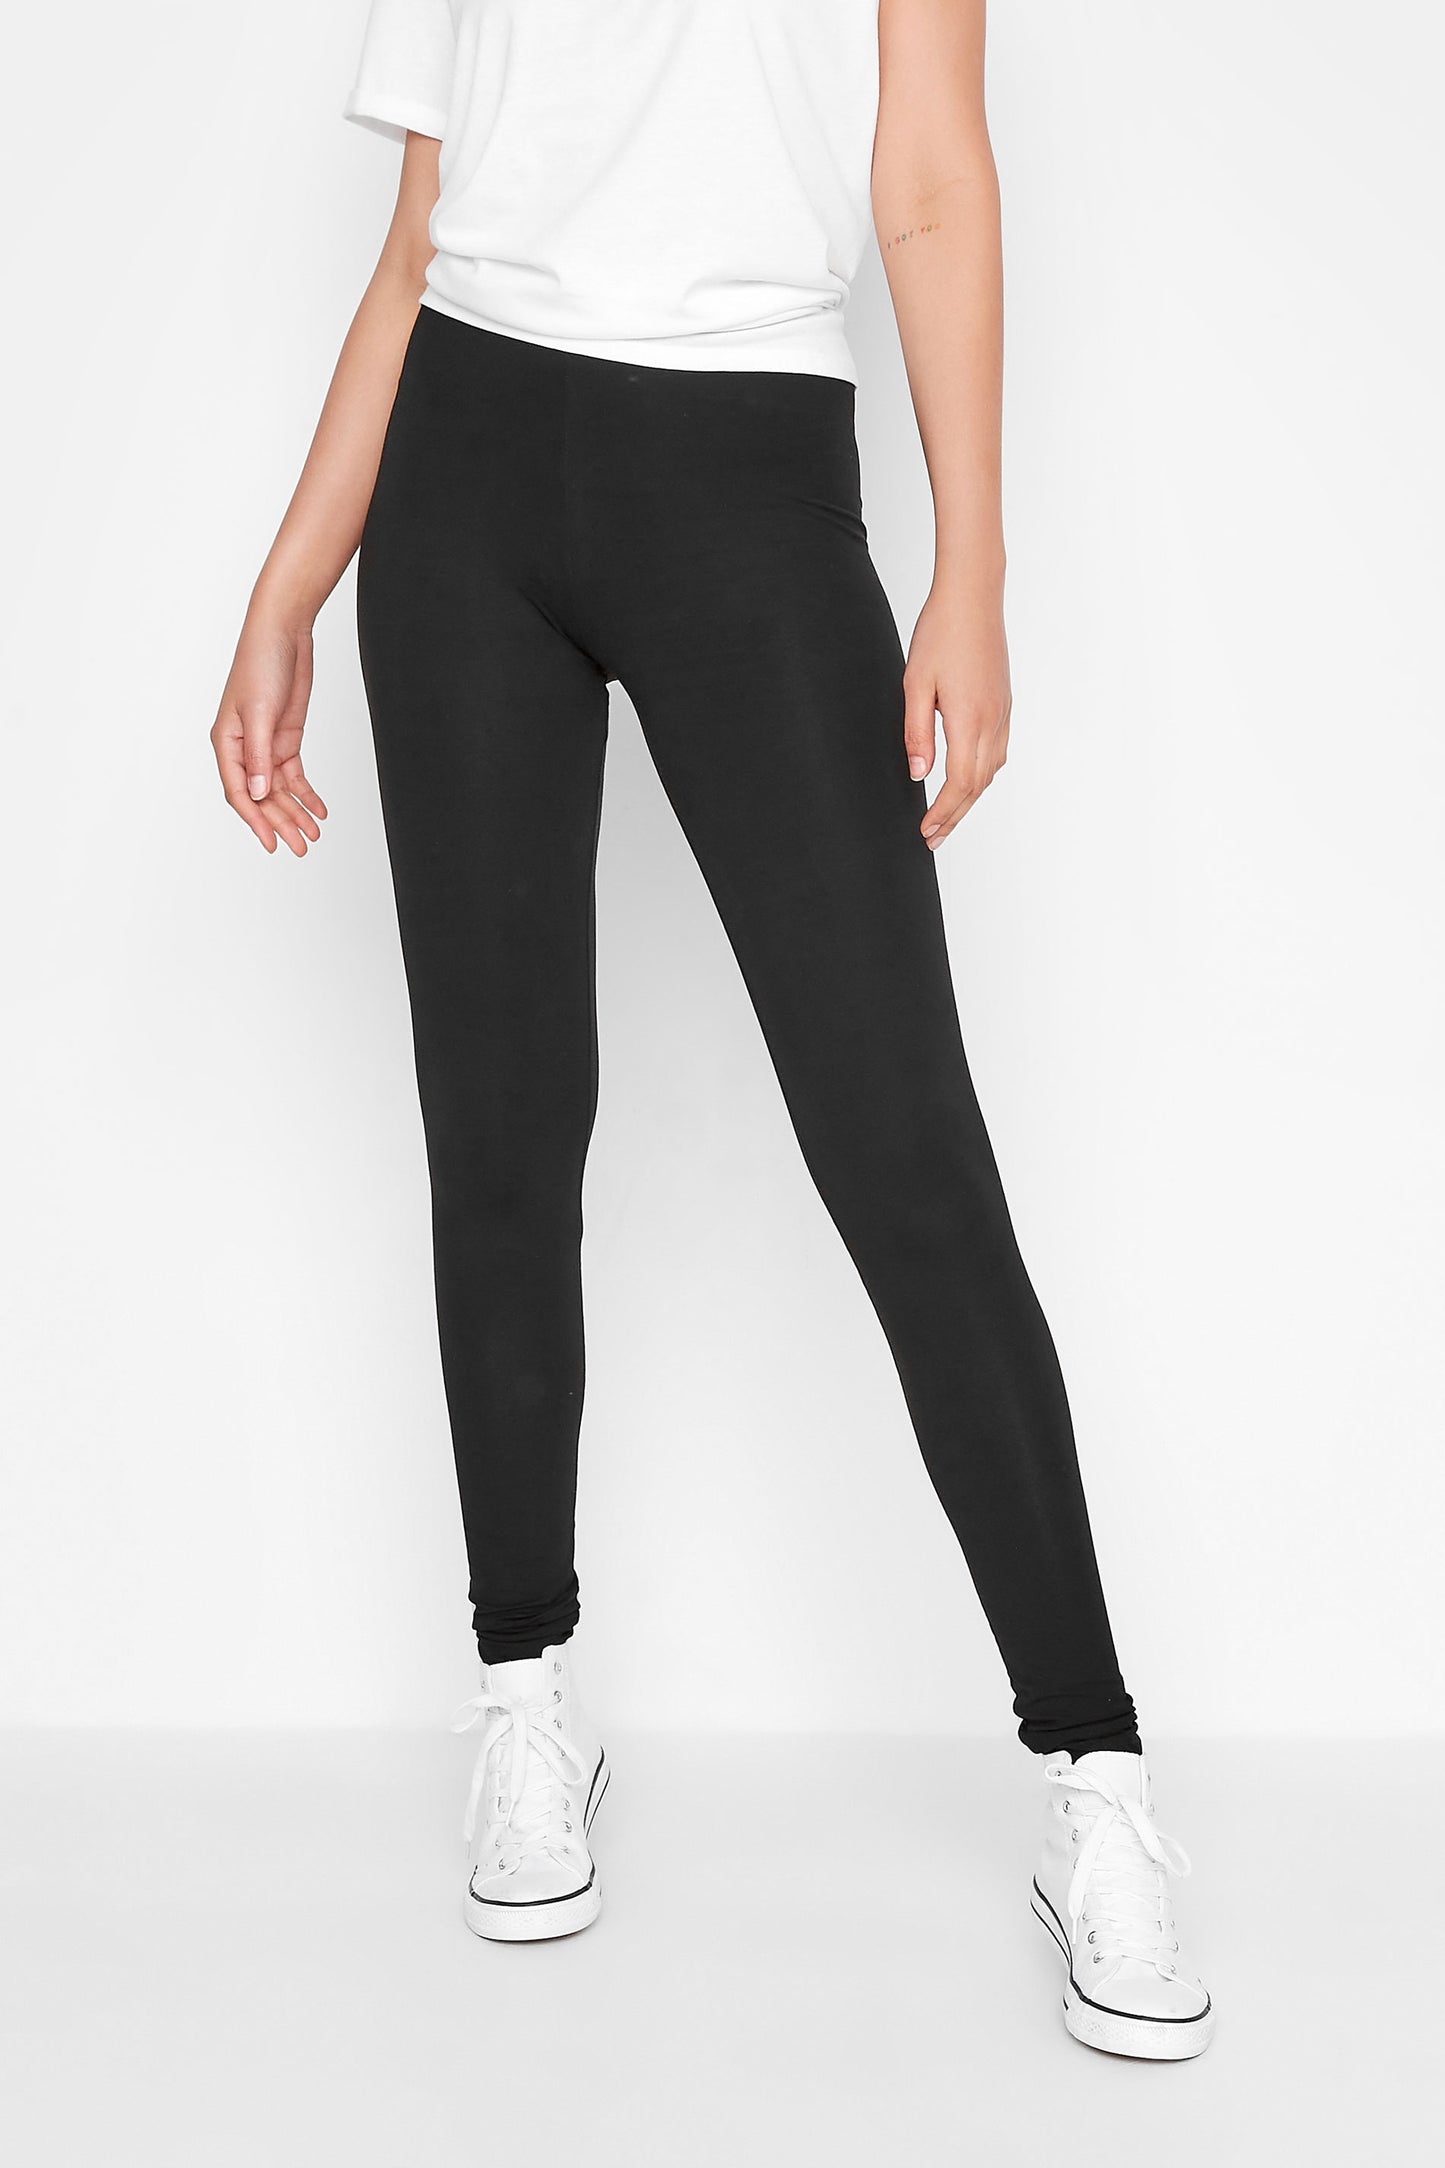 LTS MADE FOR GOOD Tall Black Stretch Cotton Leggings